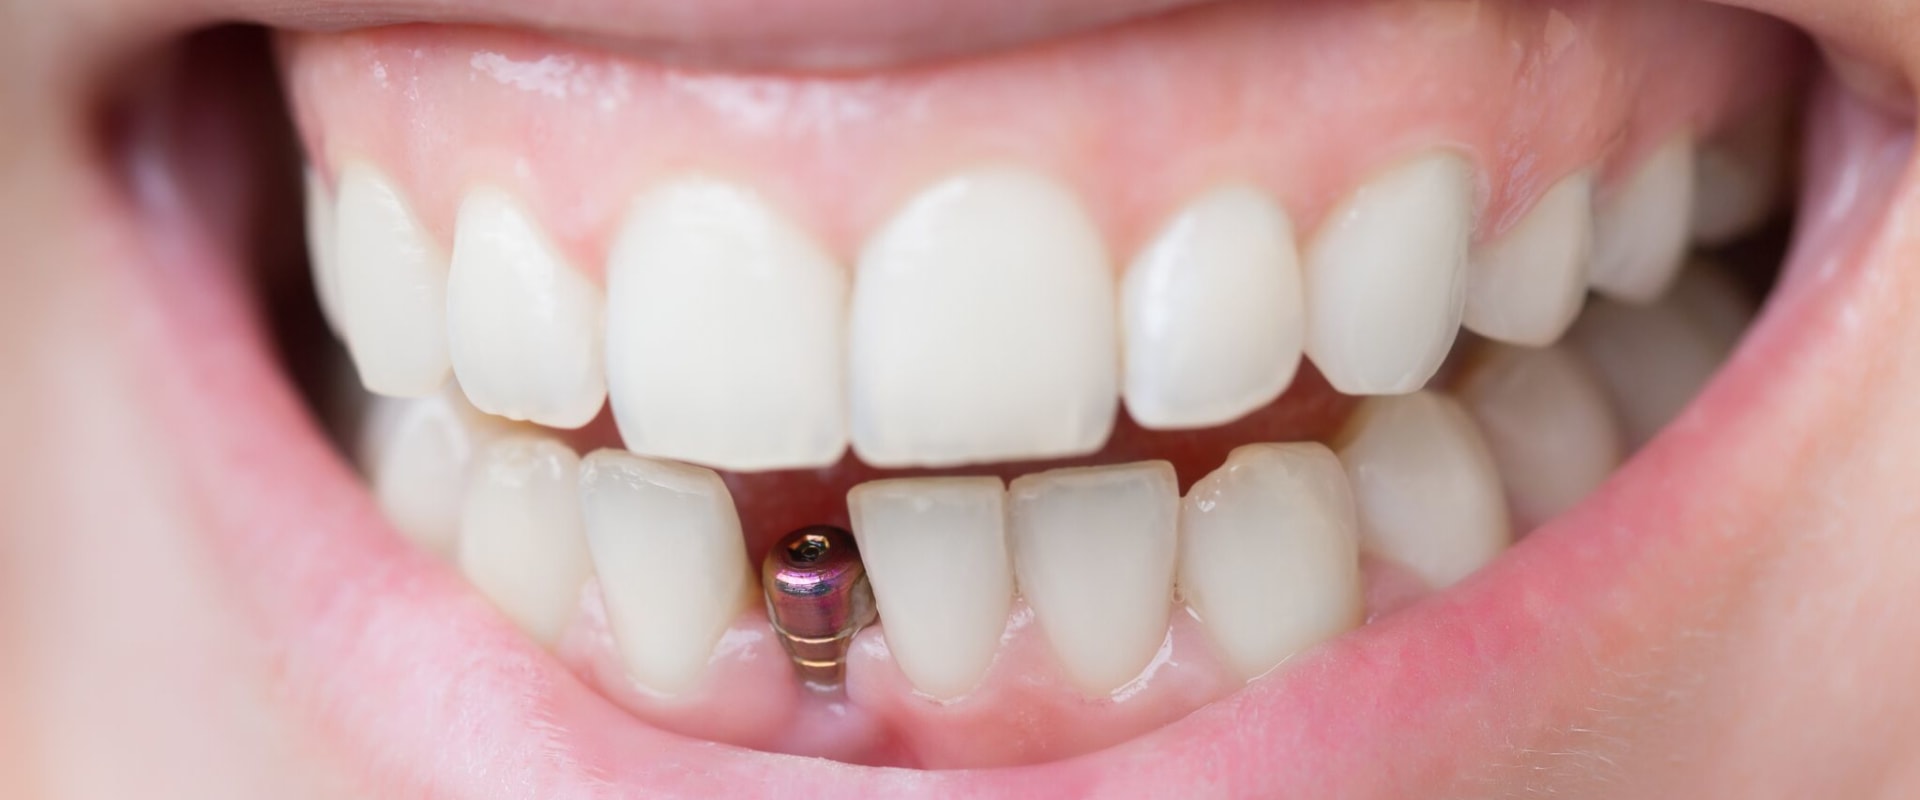 How real do dental implants look?